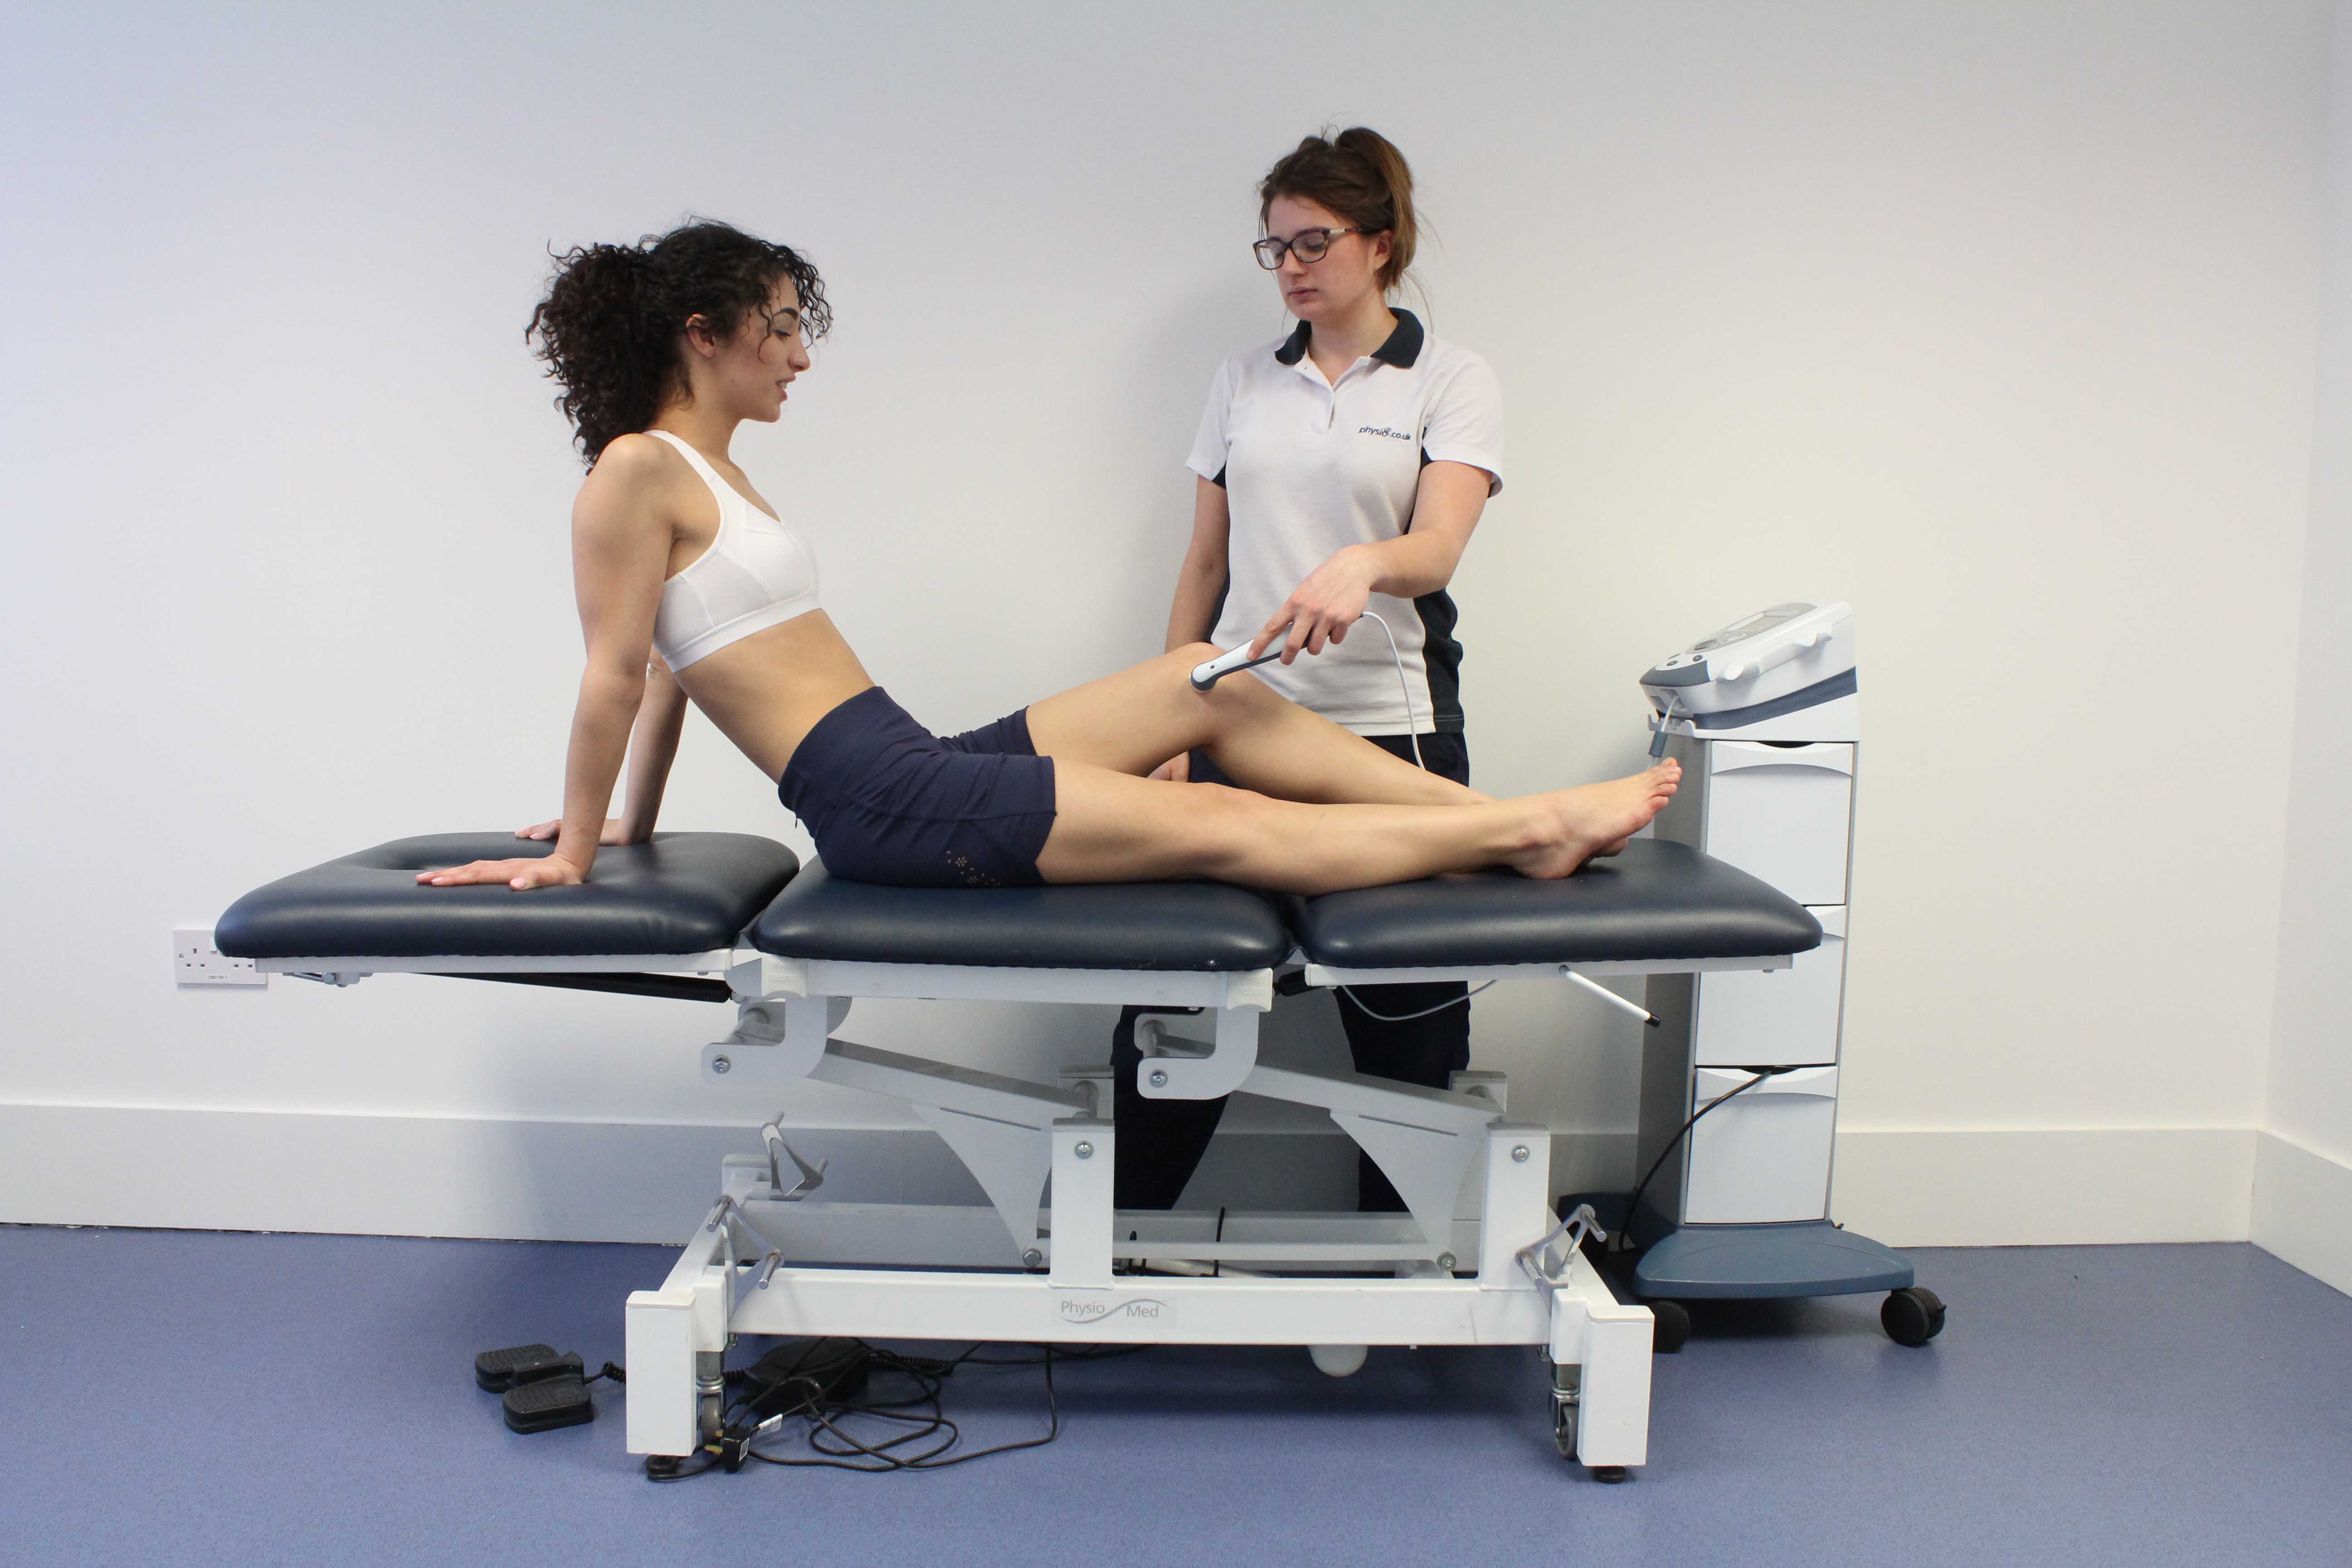 Ultrasound applied to the knee by specialist physiotherapist